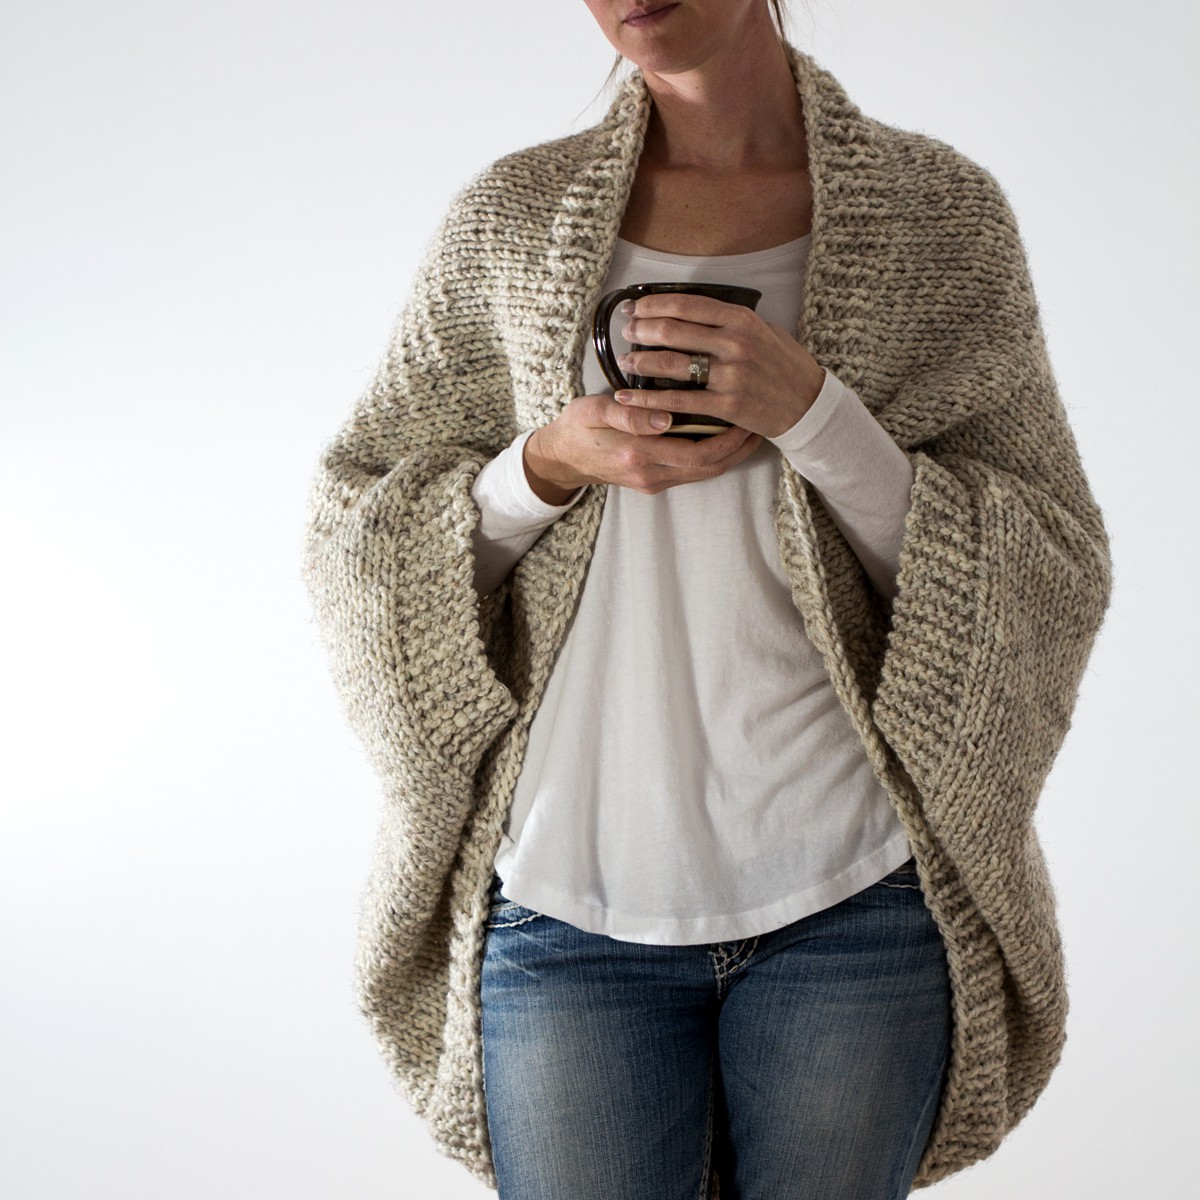 Decisiveness Over Sized Scoop Sweater Knitting Pattern